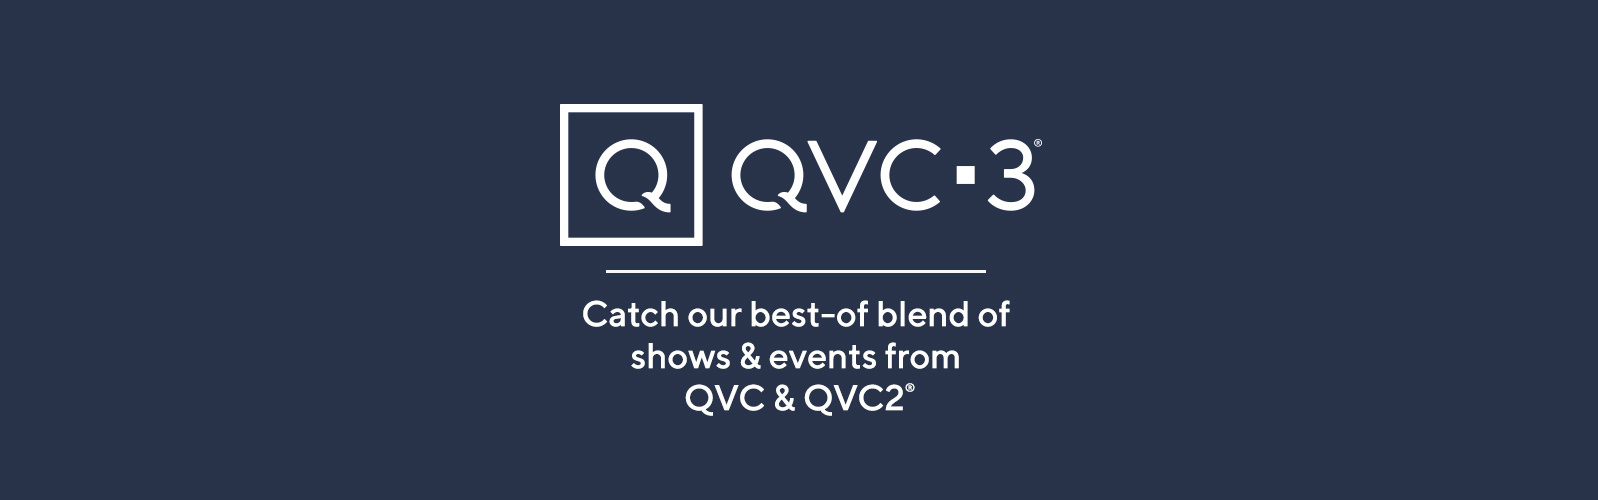 Qvc Com Official Site, (14) Available for 3 Easy Payments.